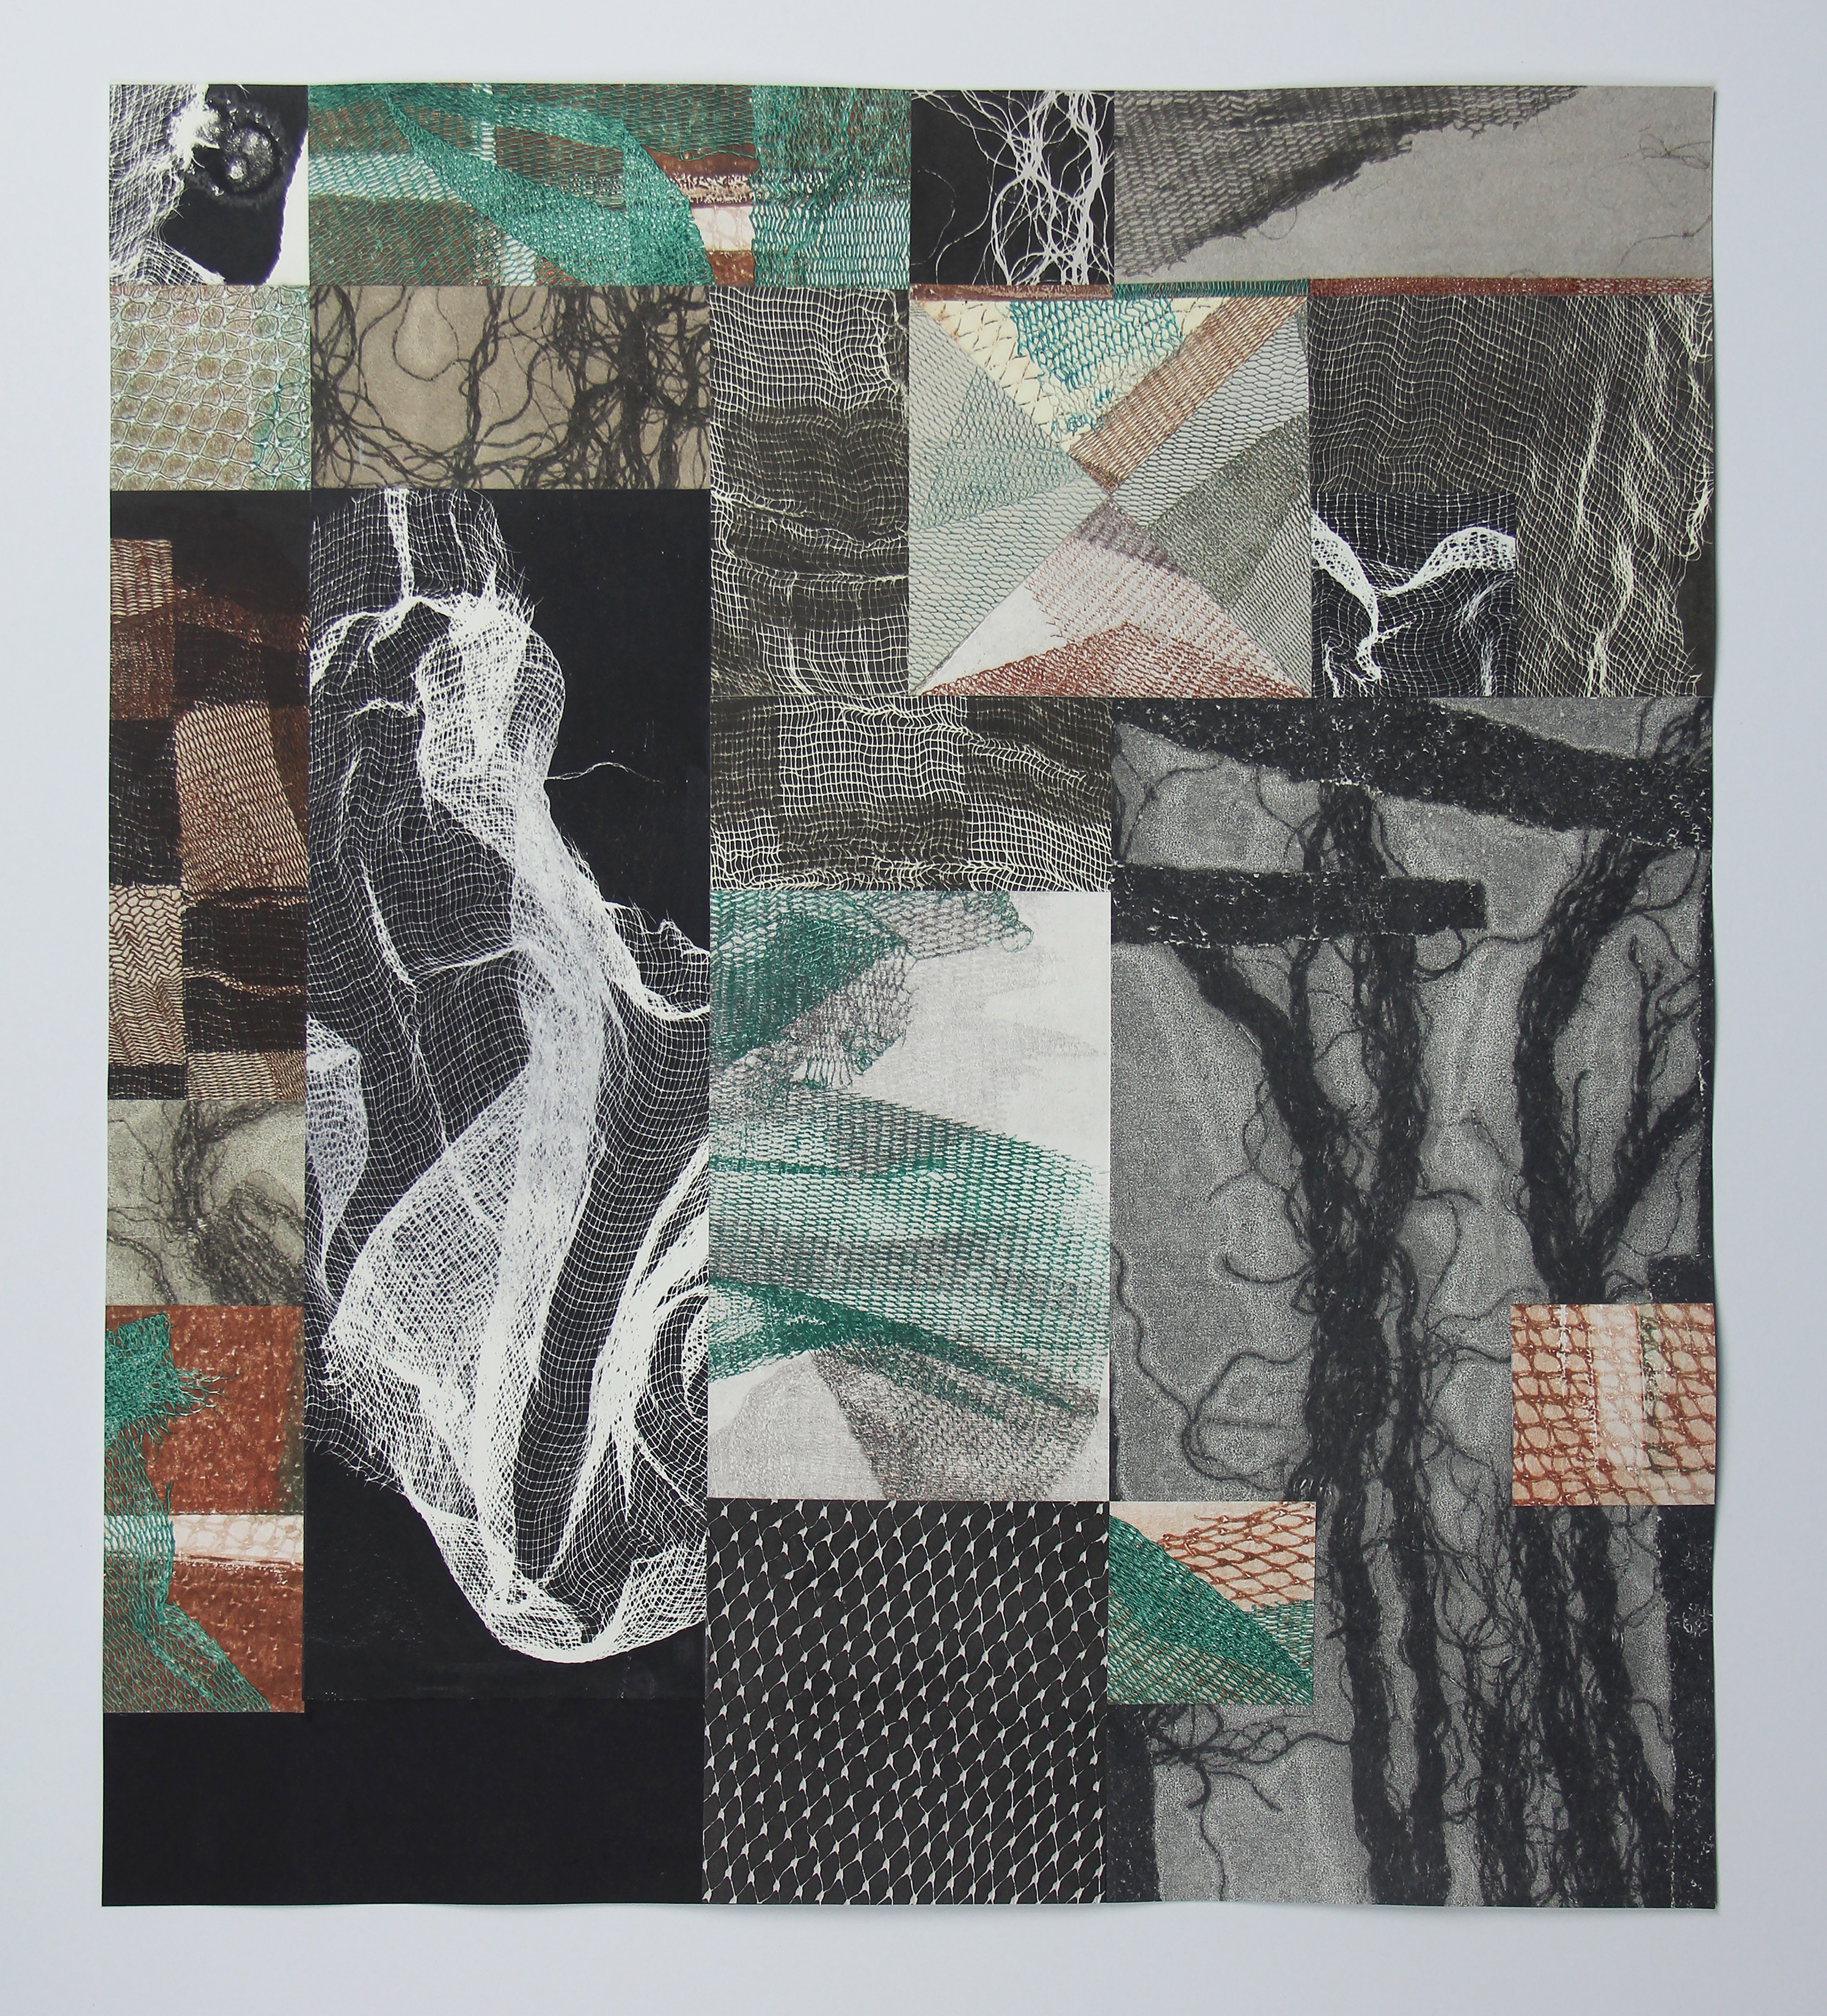 Kimberly Dummons, Rooted Memory, 2019, monotype collage, 18" x 20"